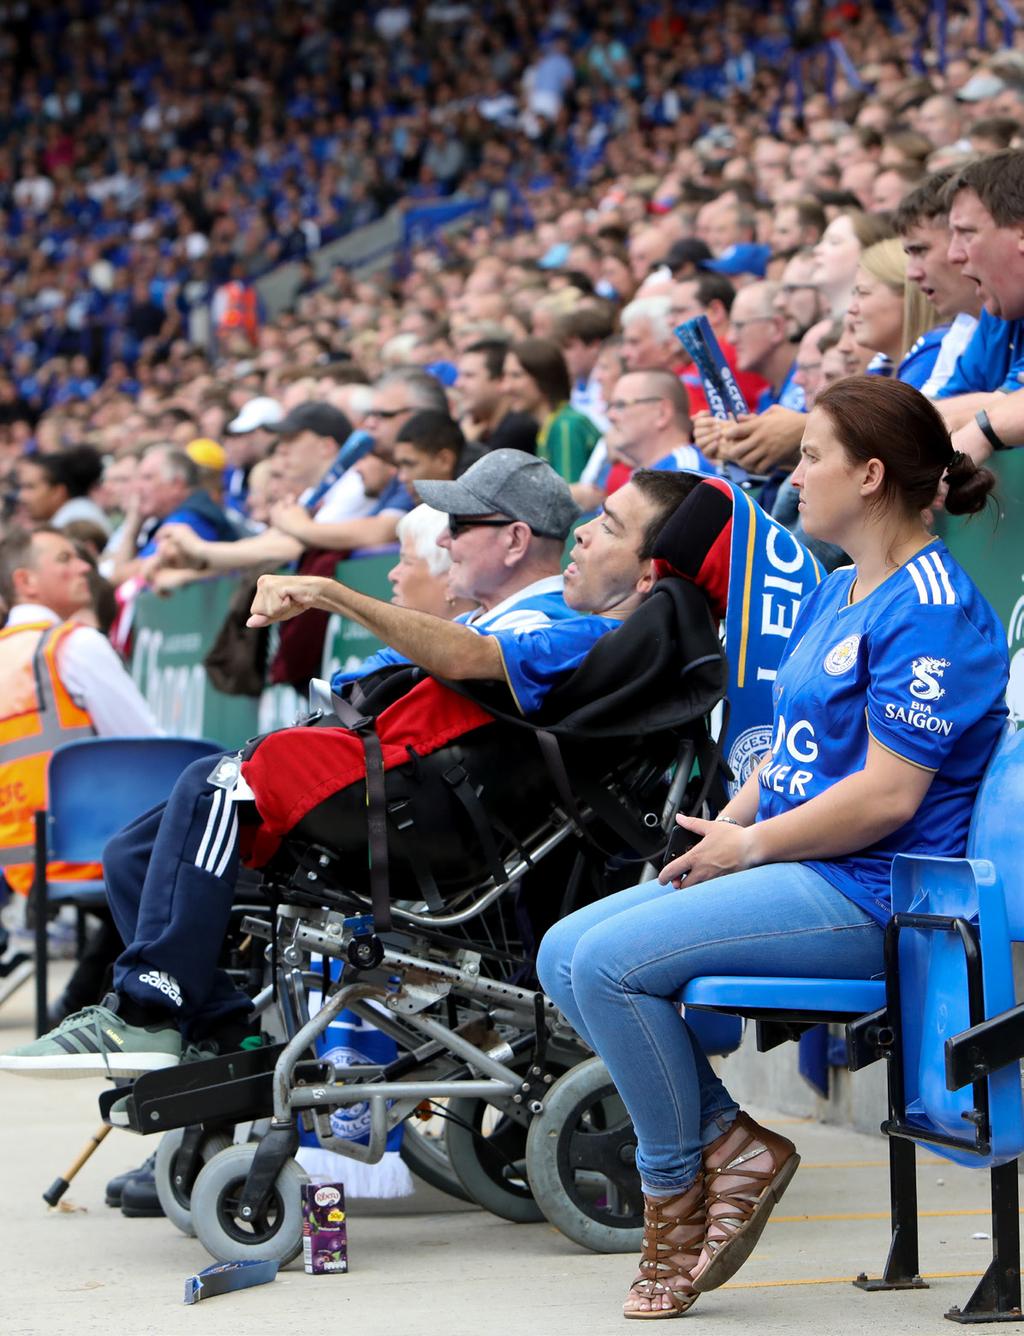 LCFC DSA (DISABILITY SUPPORT ASSOCIATION) The LCFC DSA (Disability Support Association) is an independent and voluntarily organisation, self-funded by membership fees and fundraising.